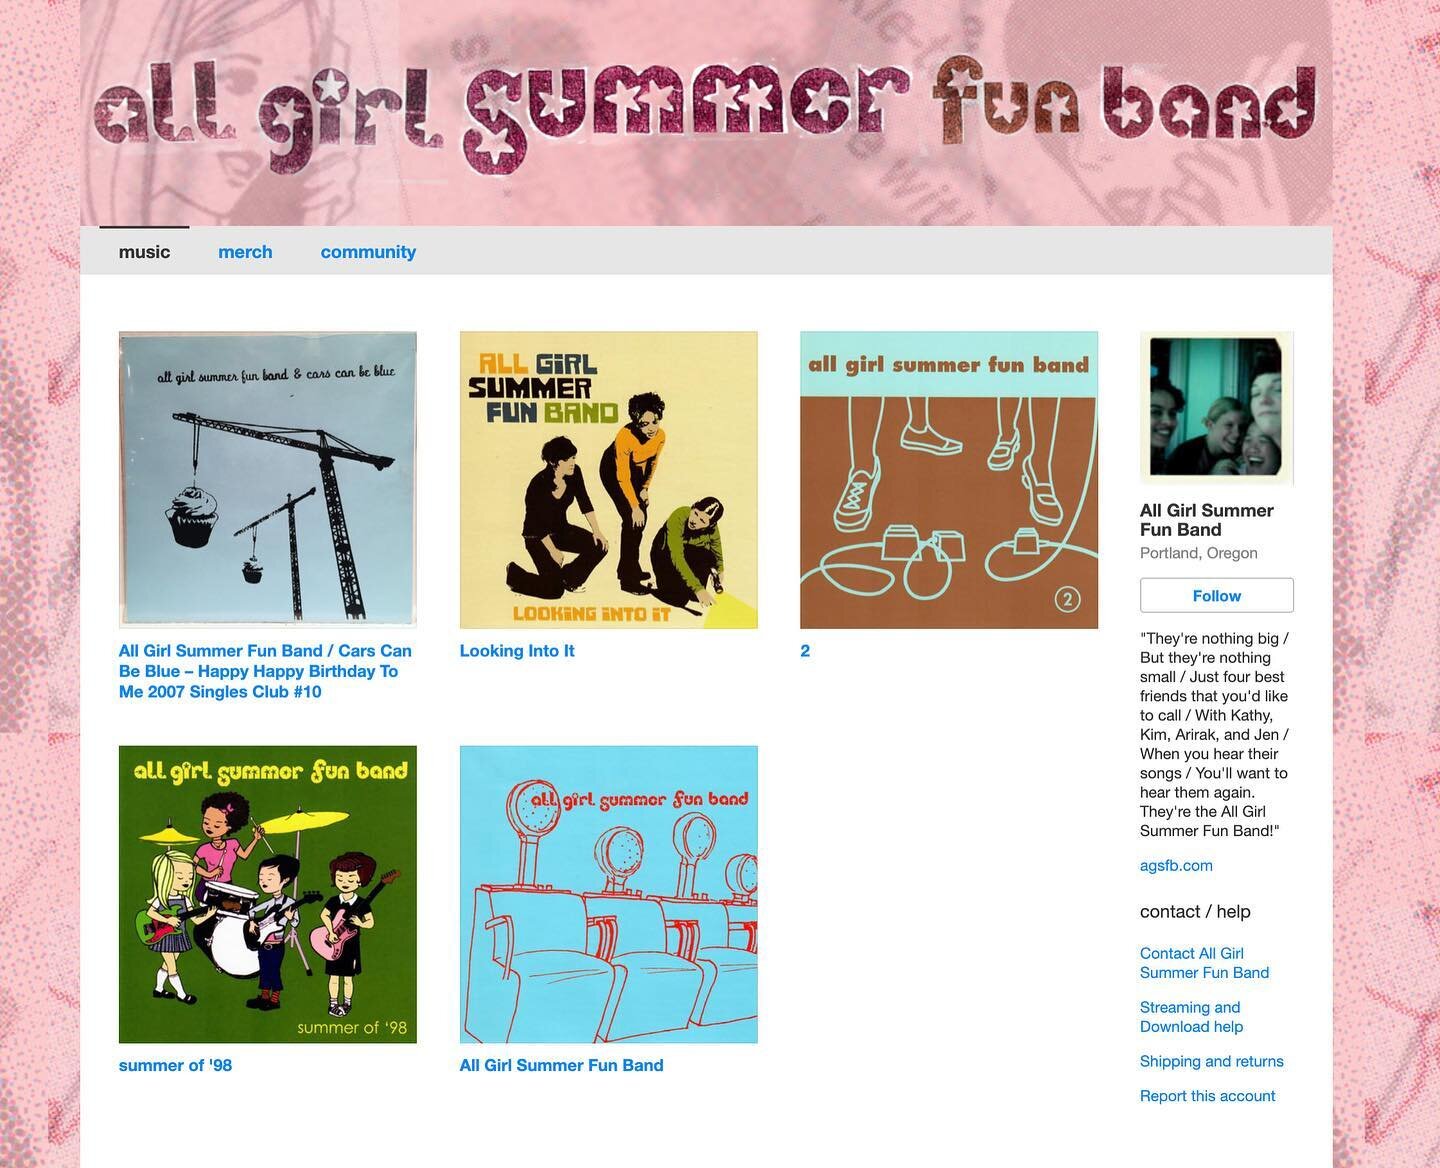 All Girl Summer Fun Band is now on Bandcamp and Instagram! Link in bio🎸💕@allgirlsummerfunband